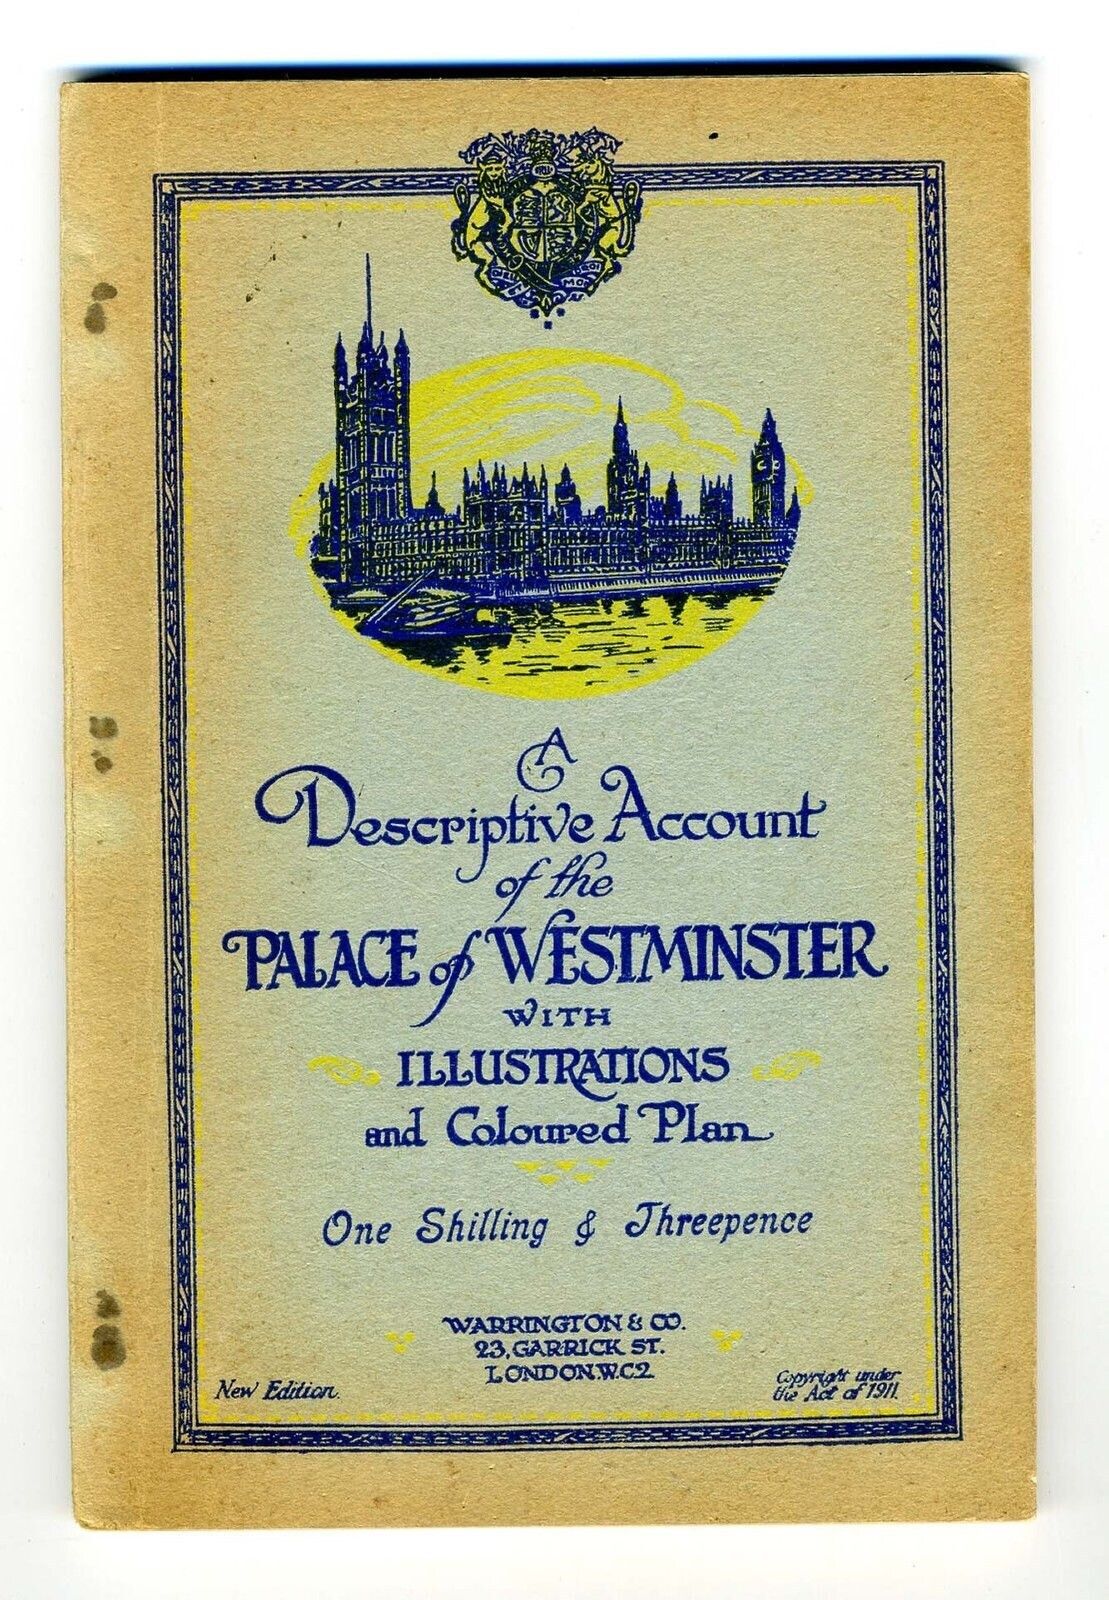 Descriptive Account of Palace of Westminster Illustrations & Coloured Plan 1911